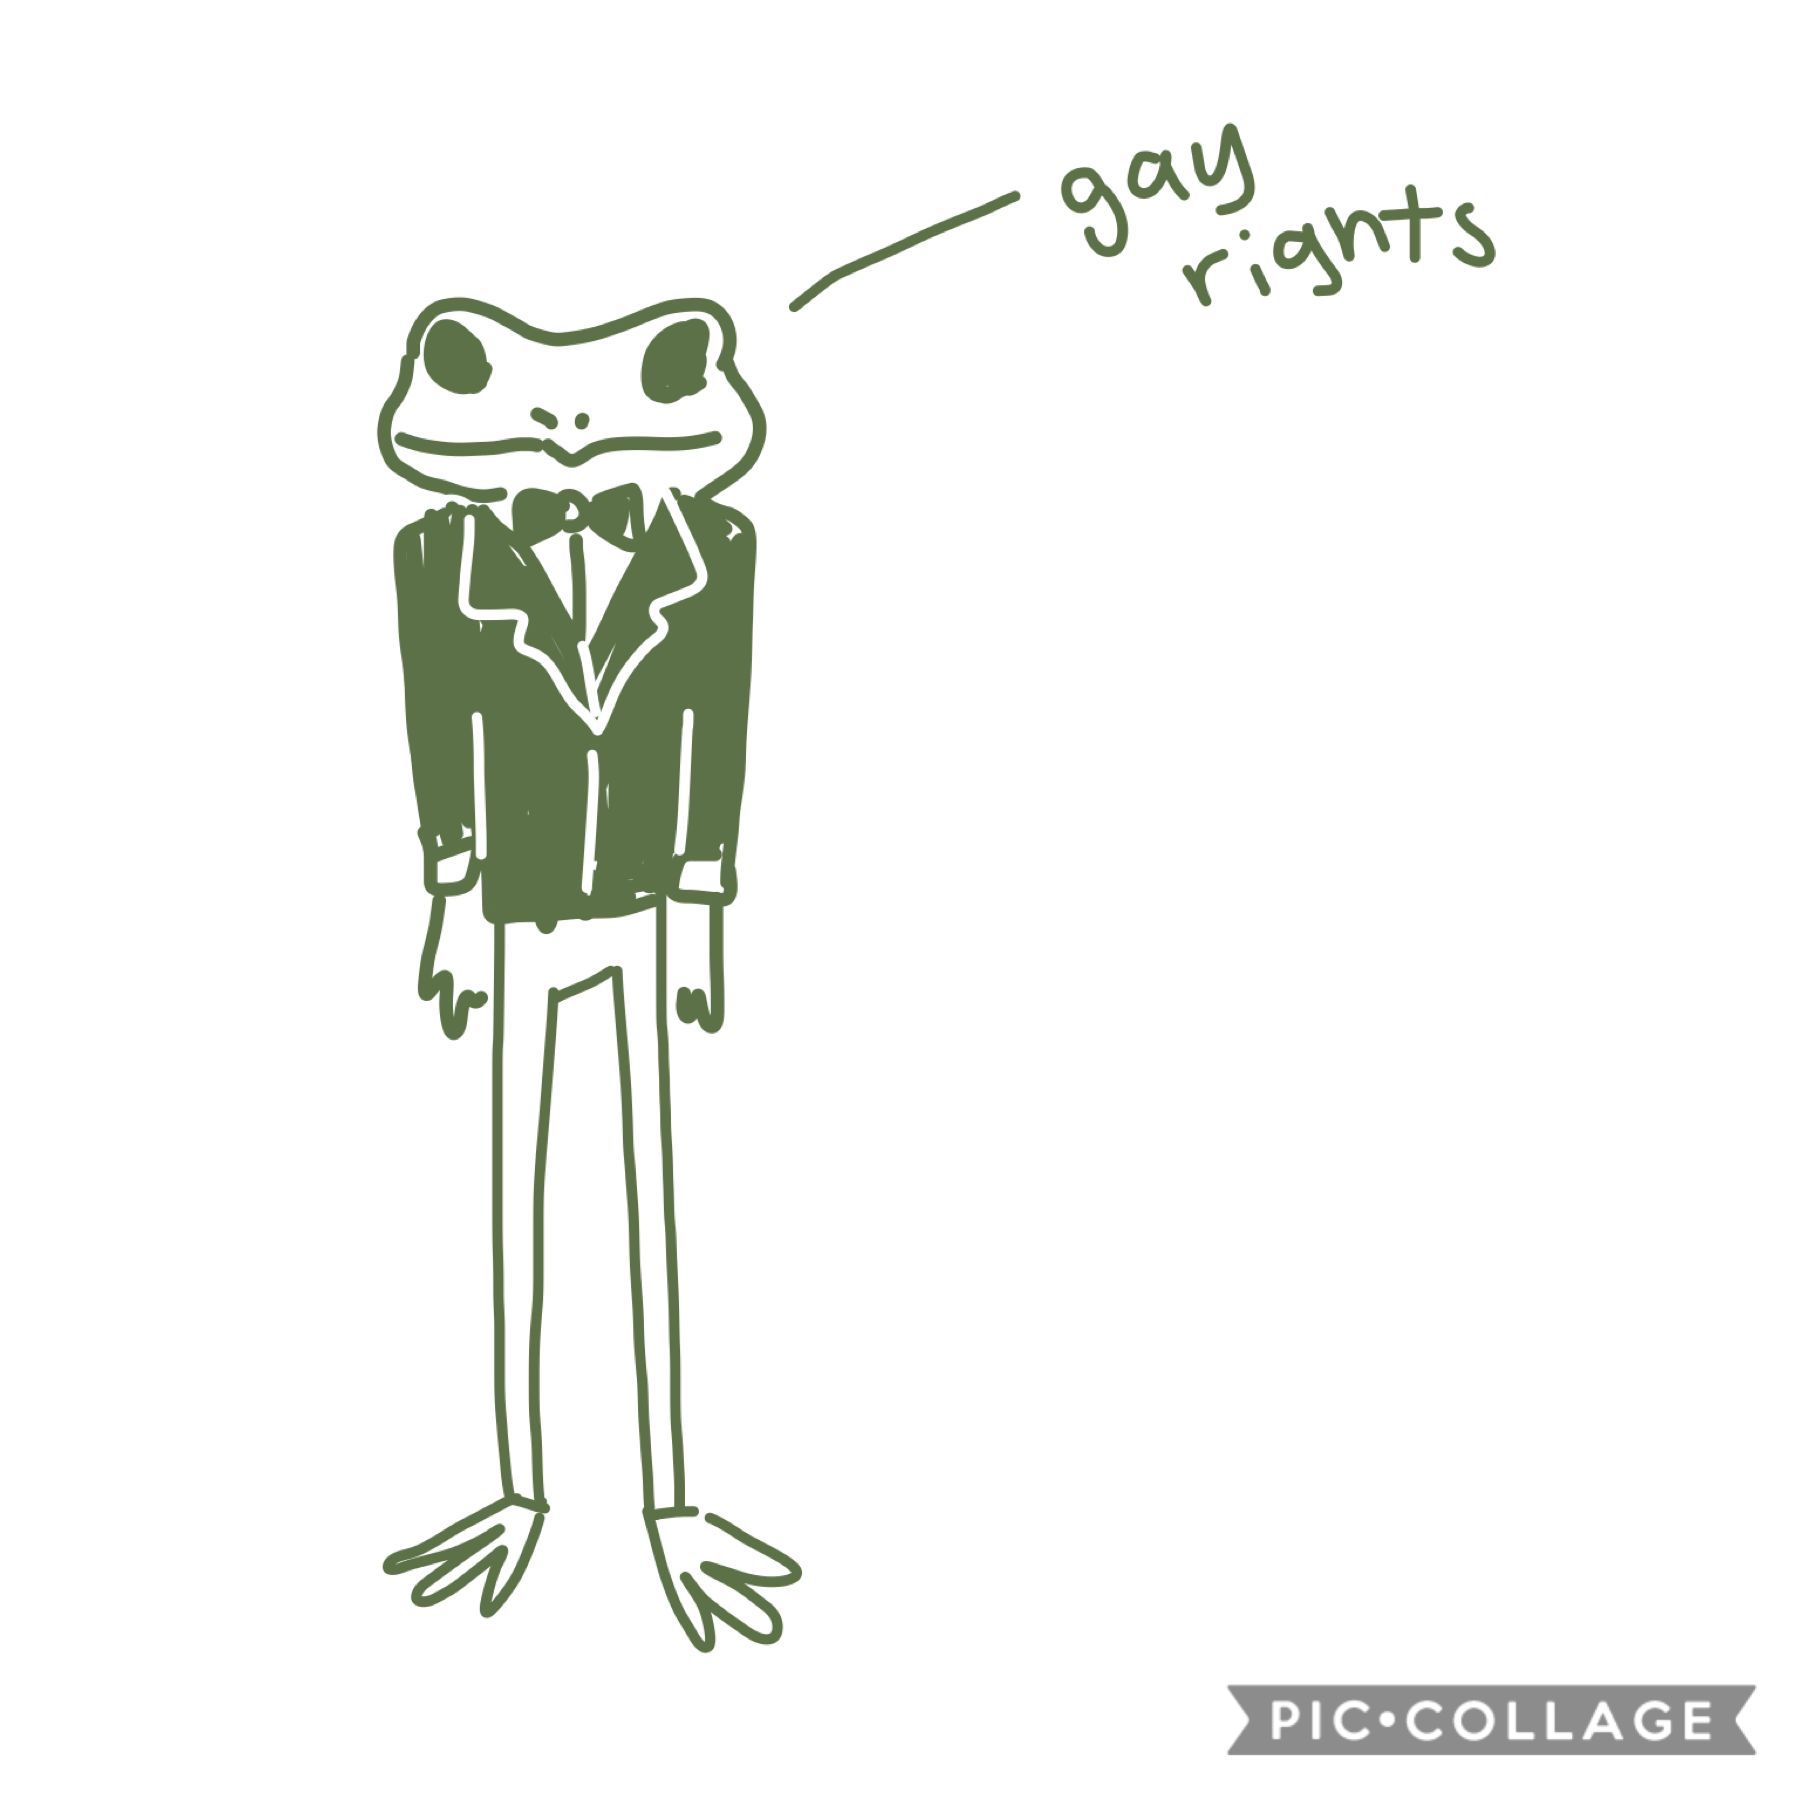 frog man says gay rights 👇
its pride month yall !!!
how are you doing???